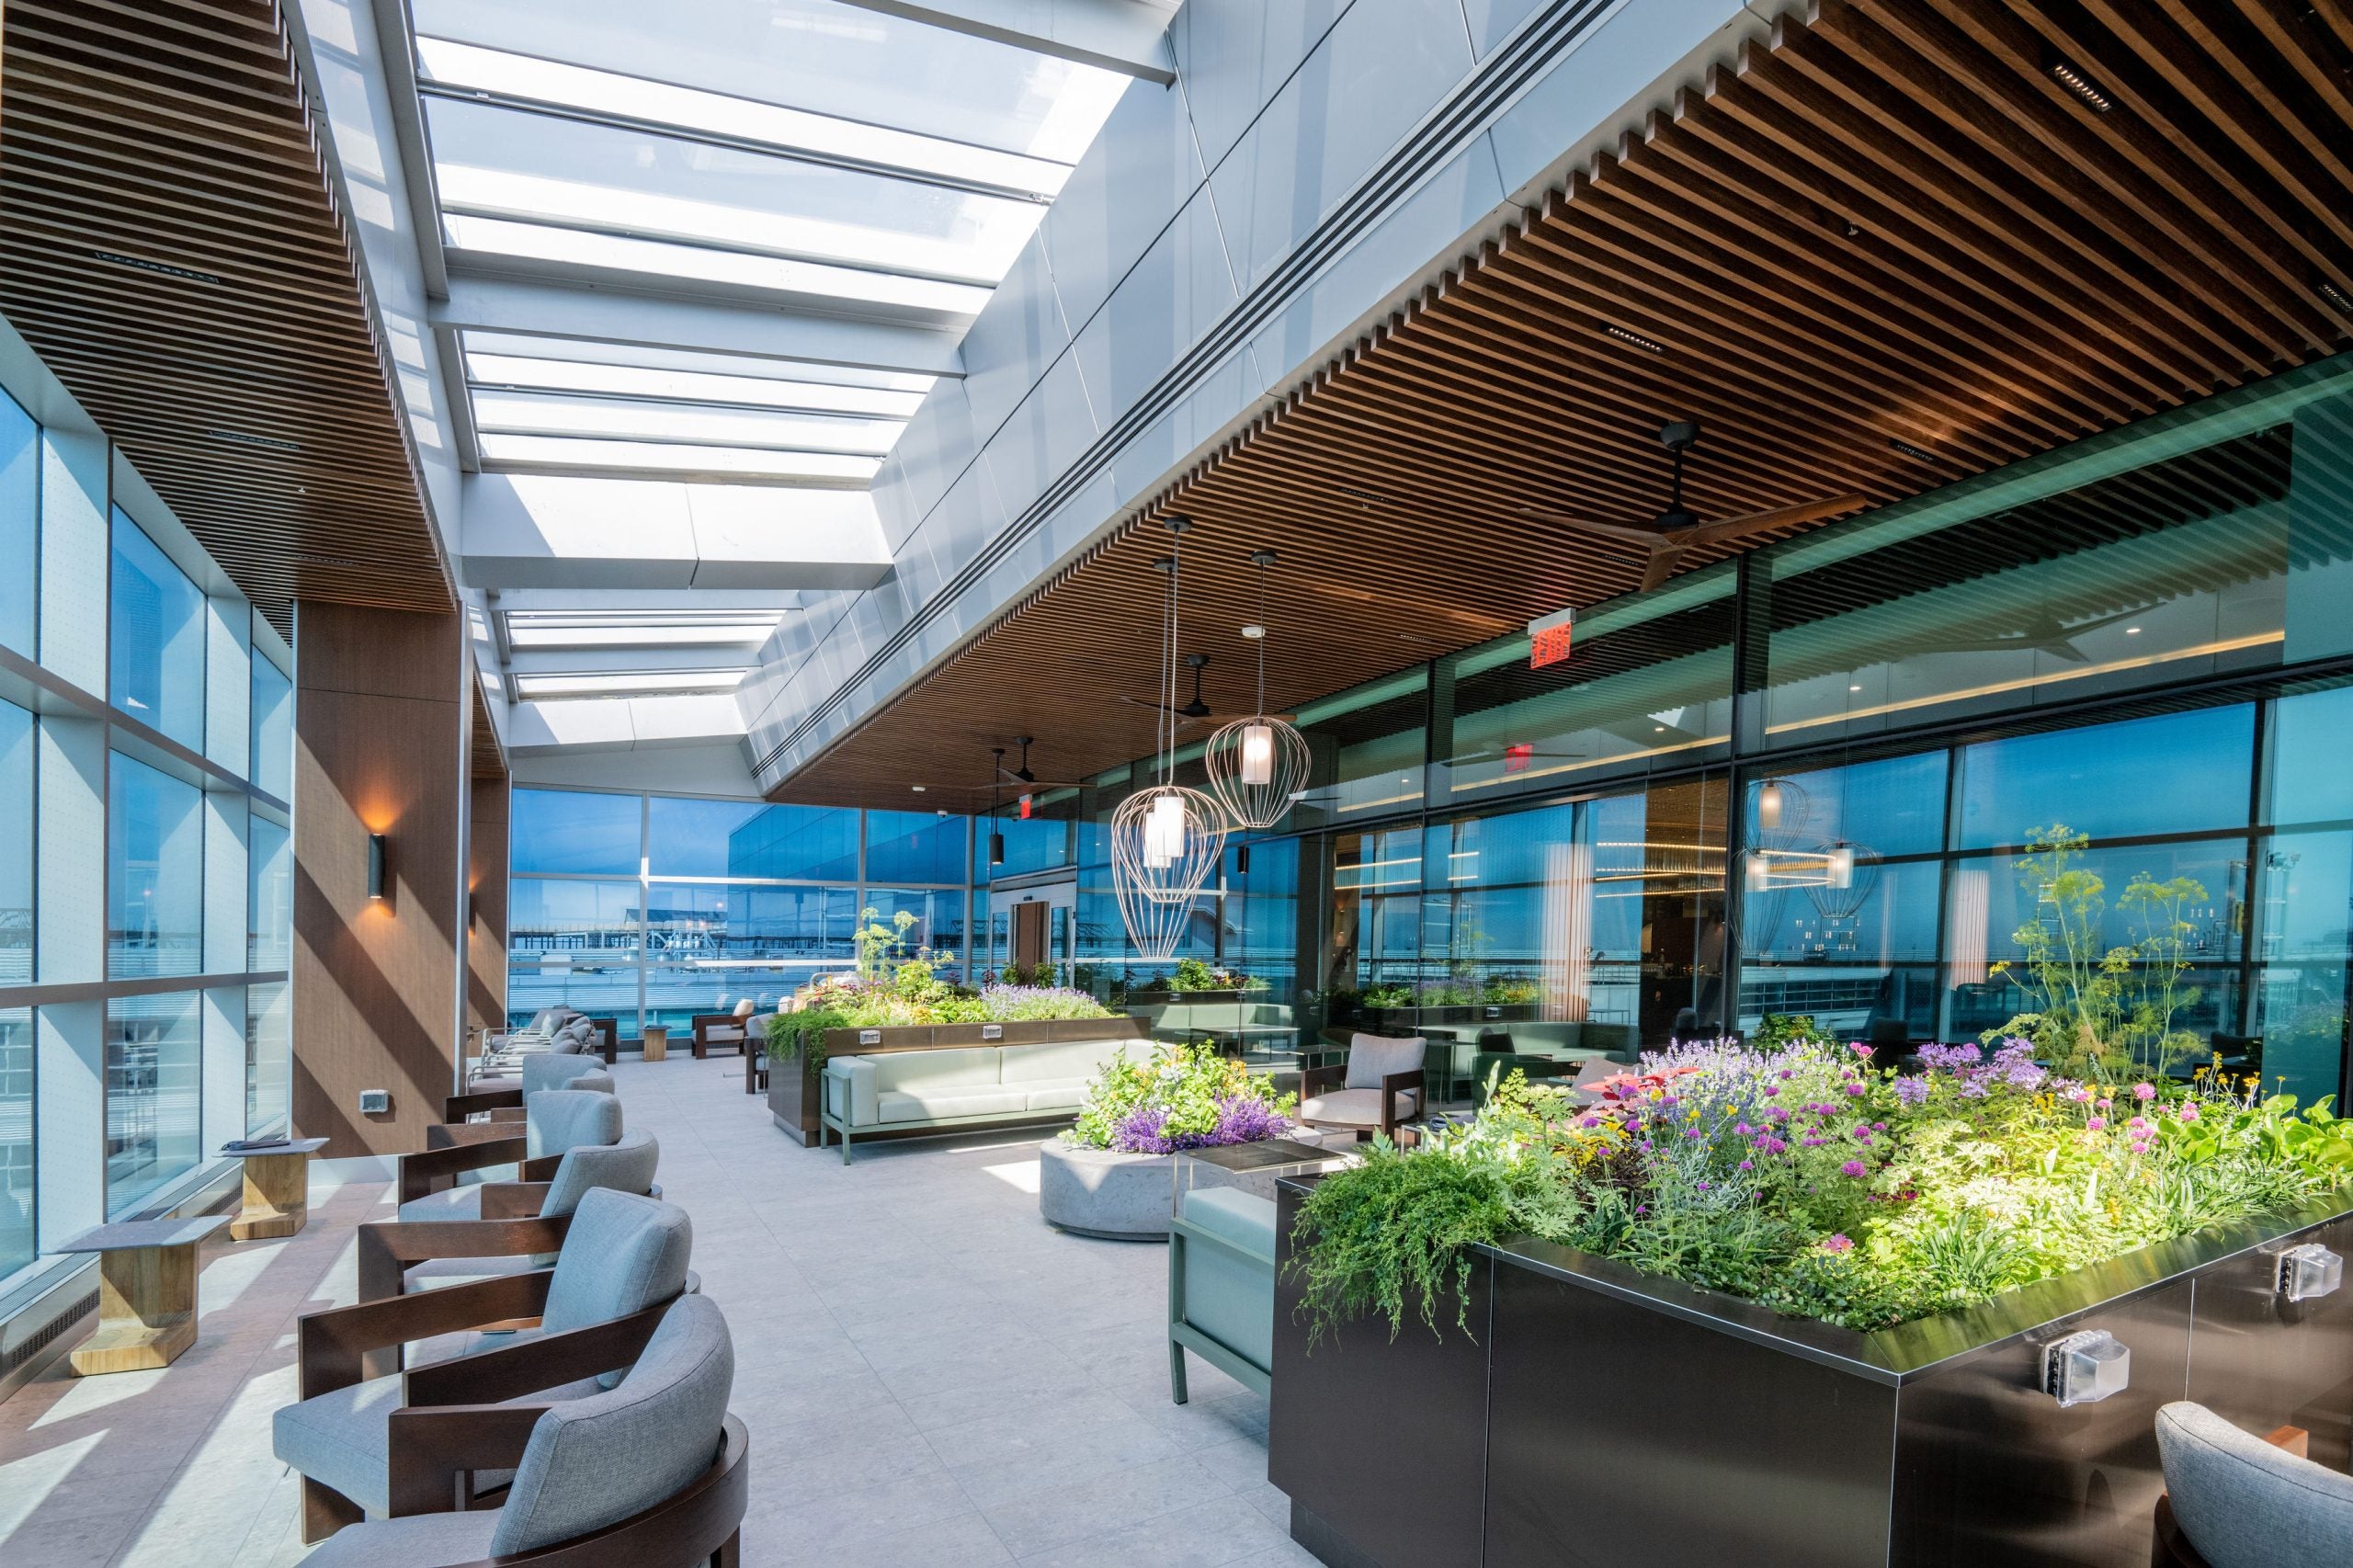 New York City’s Most Exclusive New Hot Spot Is The Delta One Lounge In JFK Airport